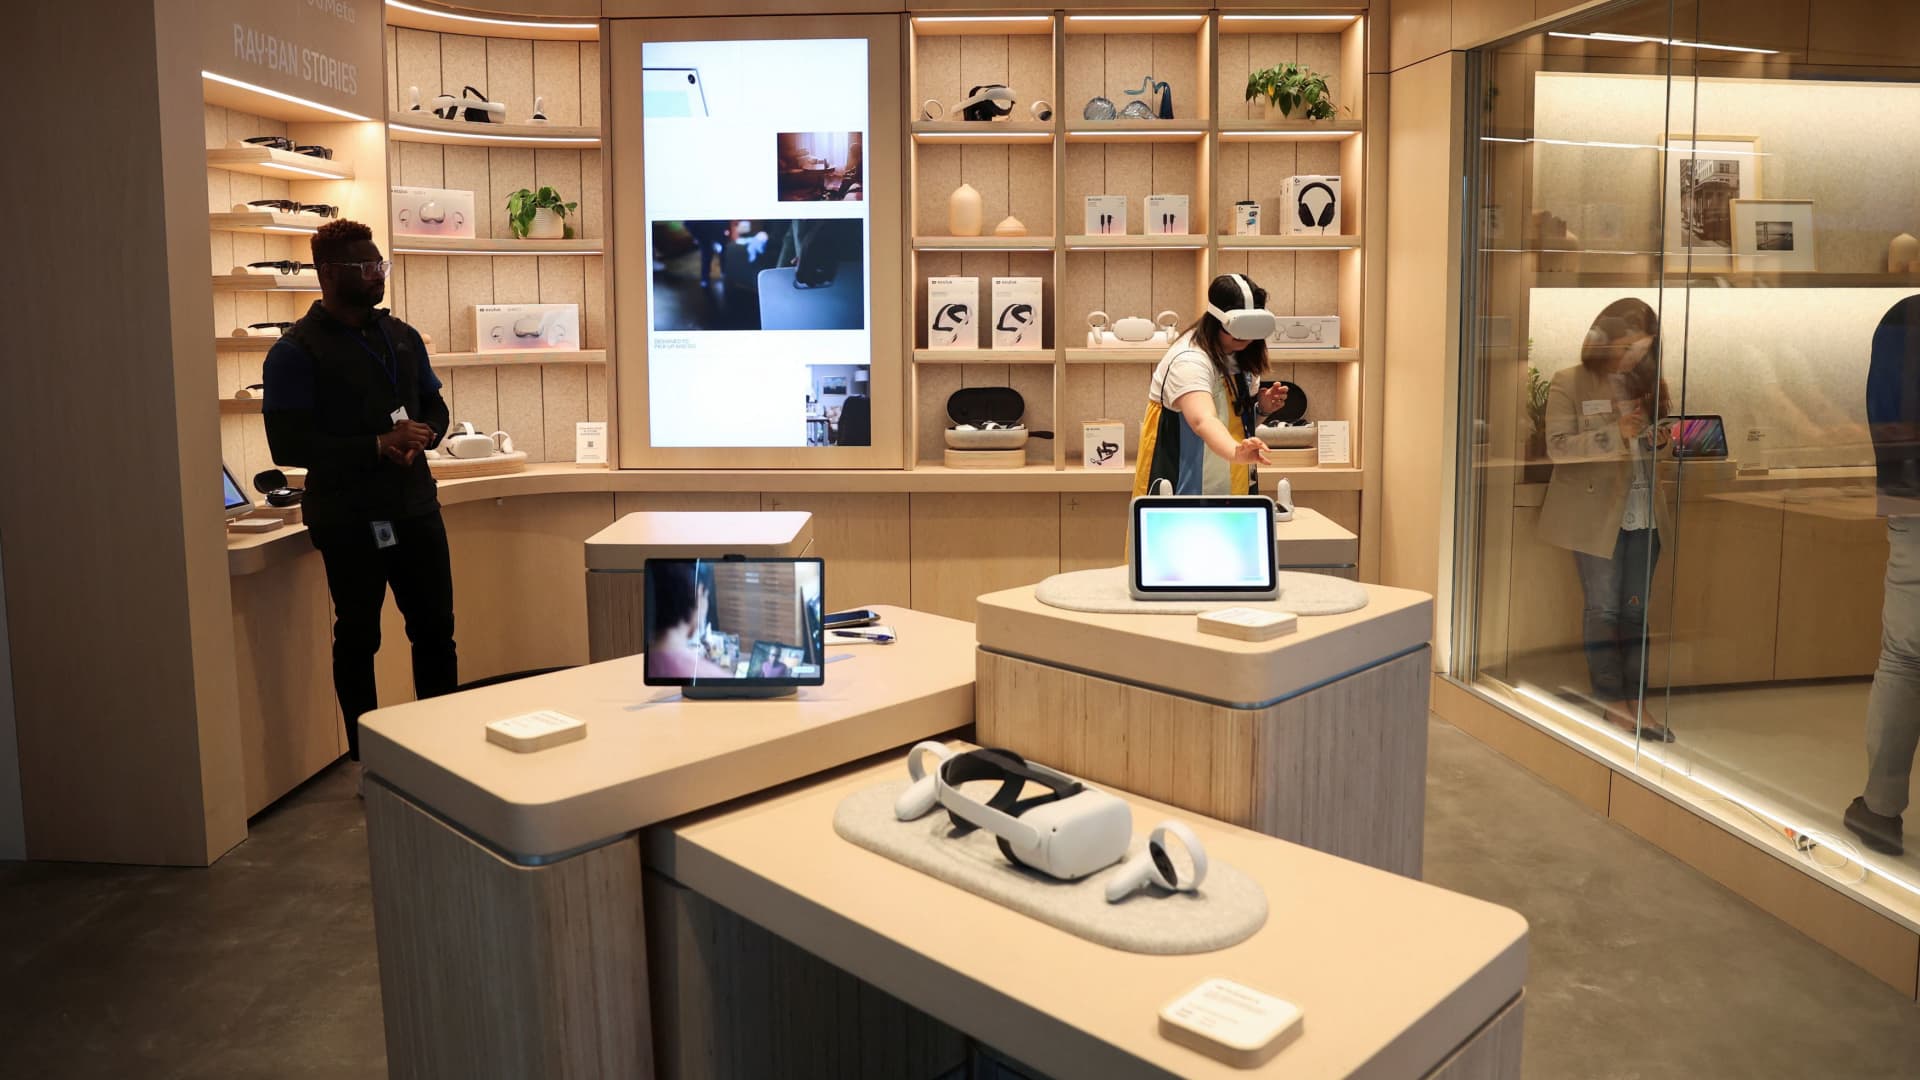 Meta team members stand ready to offer help demonstrating the different spaces during a preview of the inaugural physical store of Facebook-owner Meta Platforms Inc in Burlingame, California, May 4, 2022.